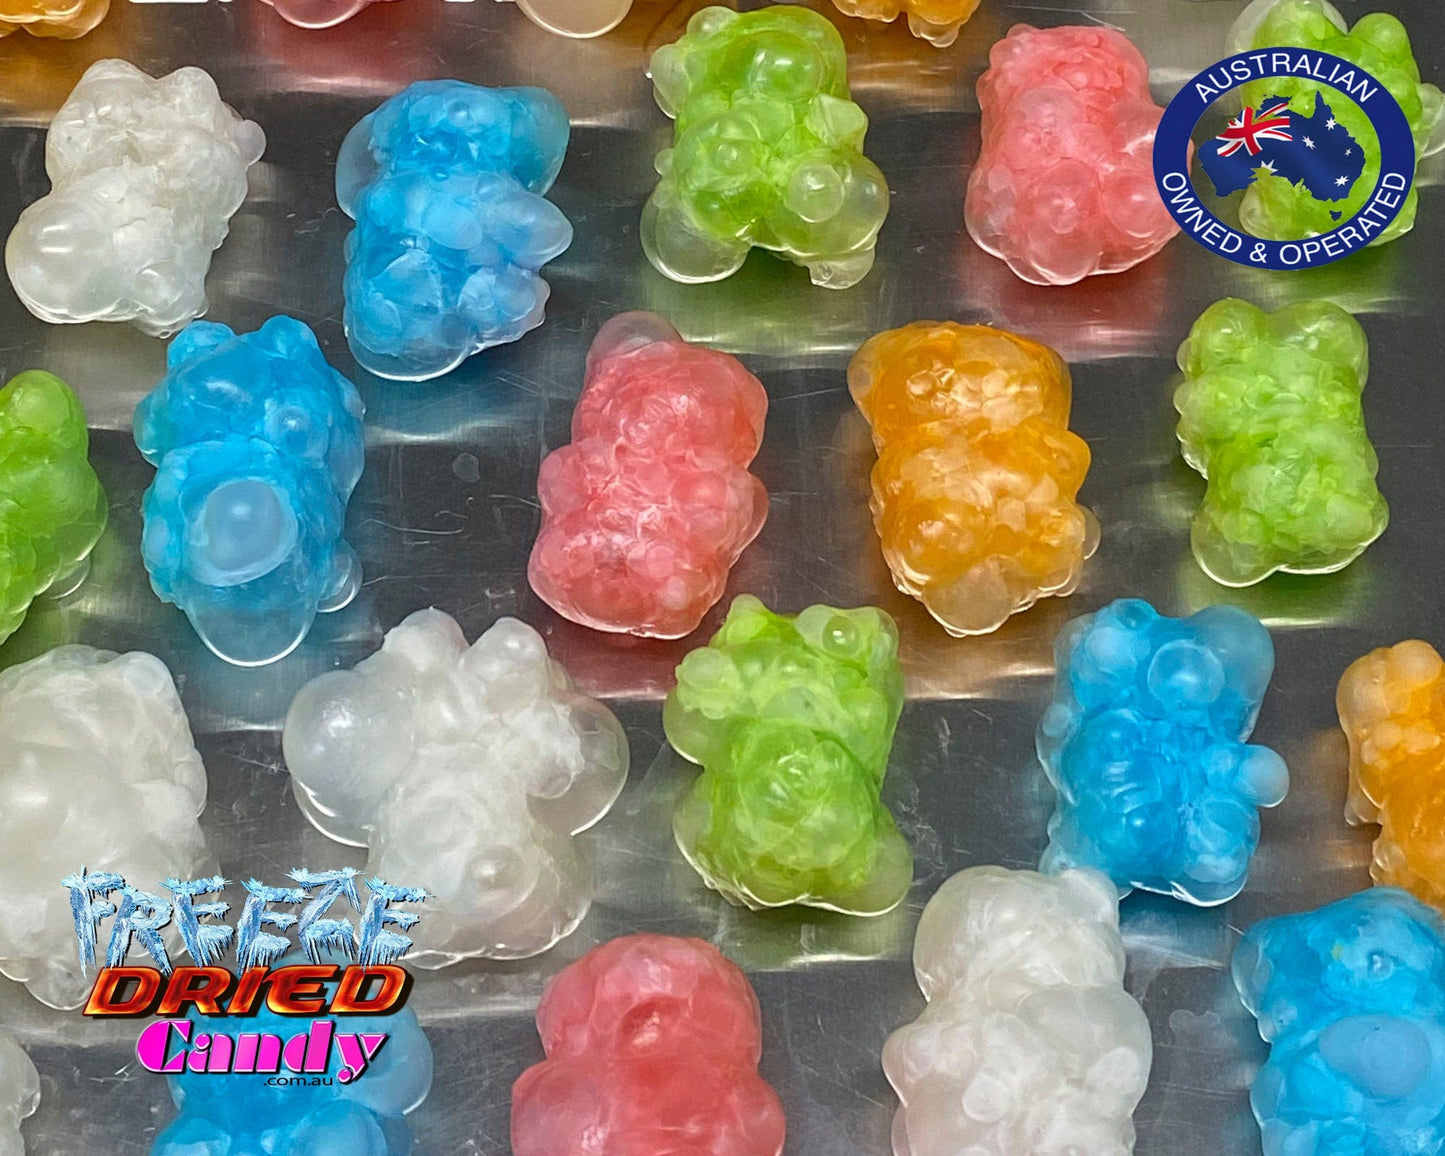  Freeze Dried Candy - Gummi Bears - Mixed Assorted Flavors Orange, Grape, Strawberry, Blue Raspberry, Cherry and Lime. An explosion of full flavor in your mouth as you bite into a Freeze Dried Candy - Gummi Bear,  No need for a handful like in its original form, one single Freeze Dried Gummi Bear will fill your mouth with flavor as it quickly melts on your tongue.  